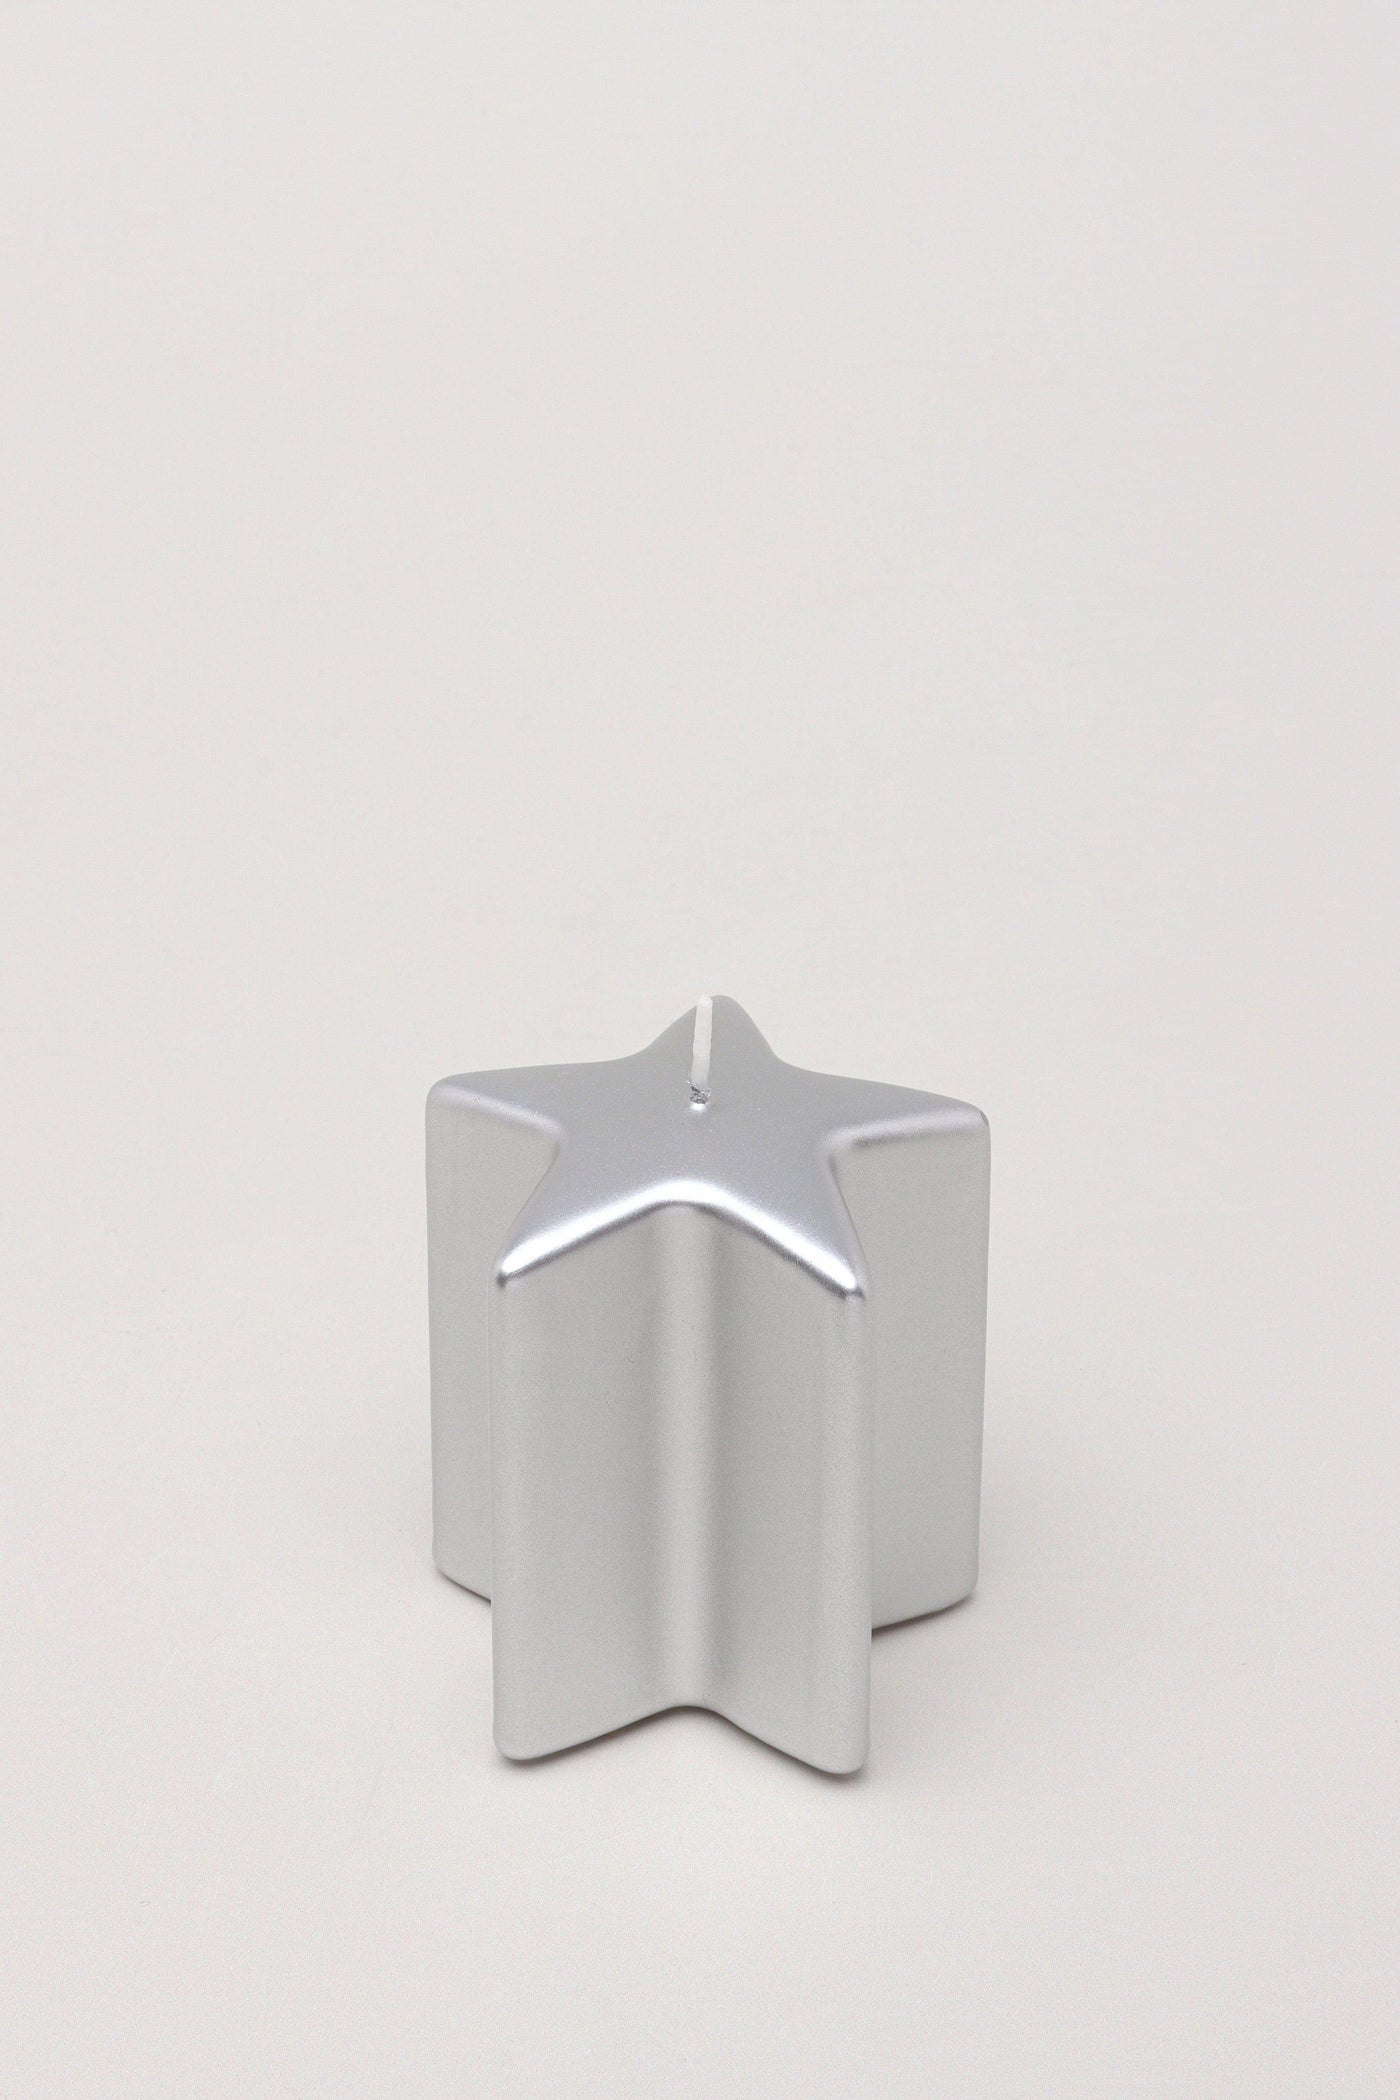 Gdecorstore Candles & Candle Holders Silver / Small Silver Star Shaped Varnished Christmas Shimmer Candles